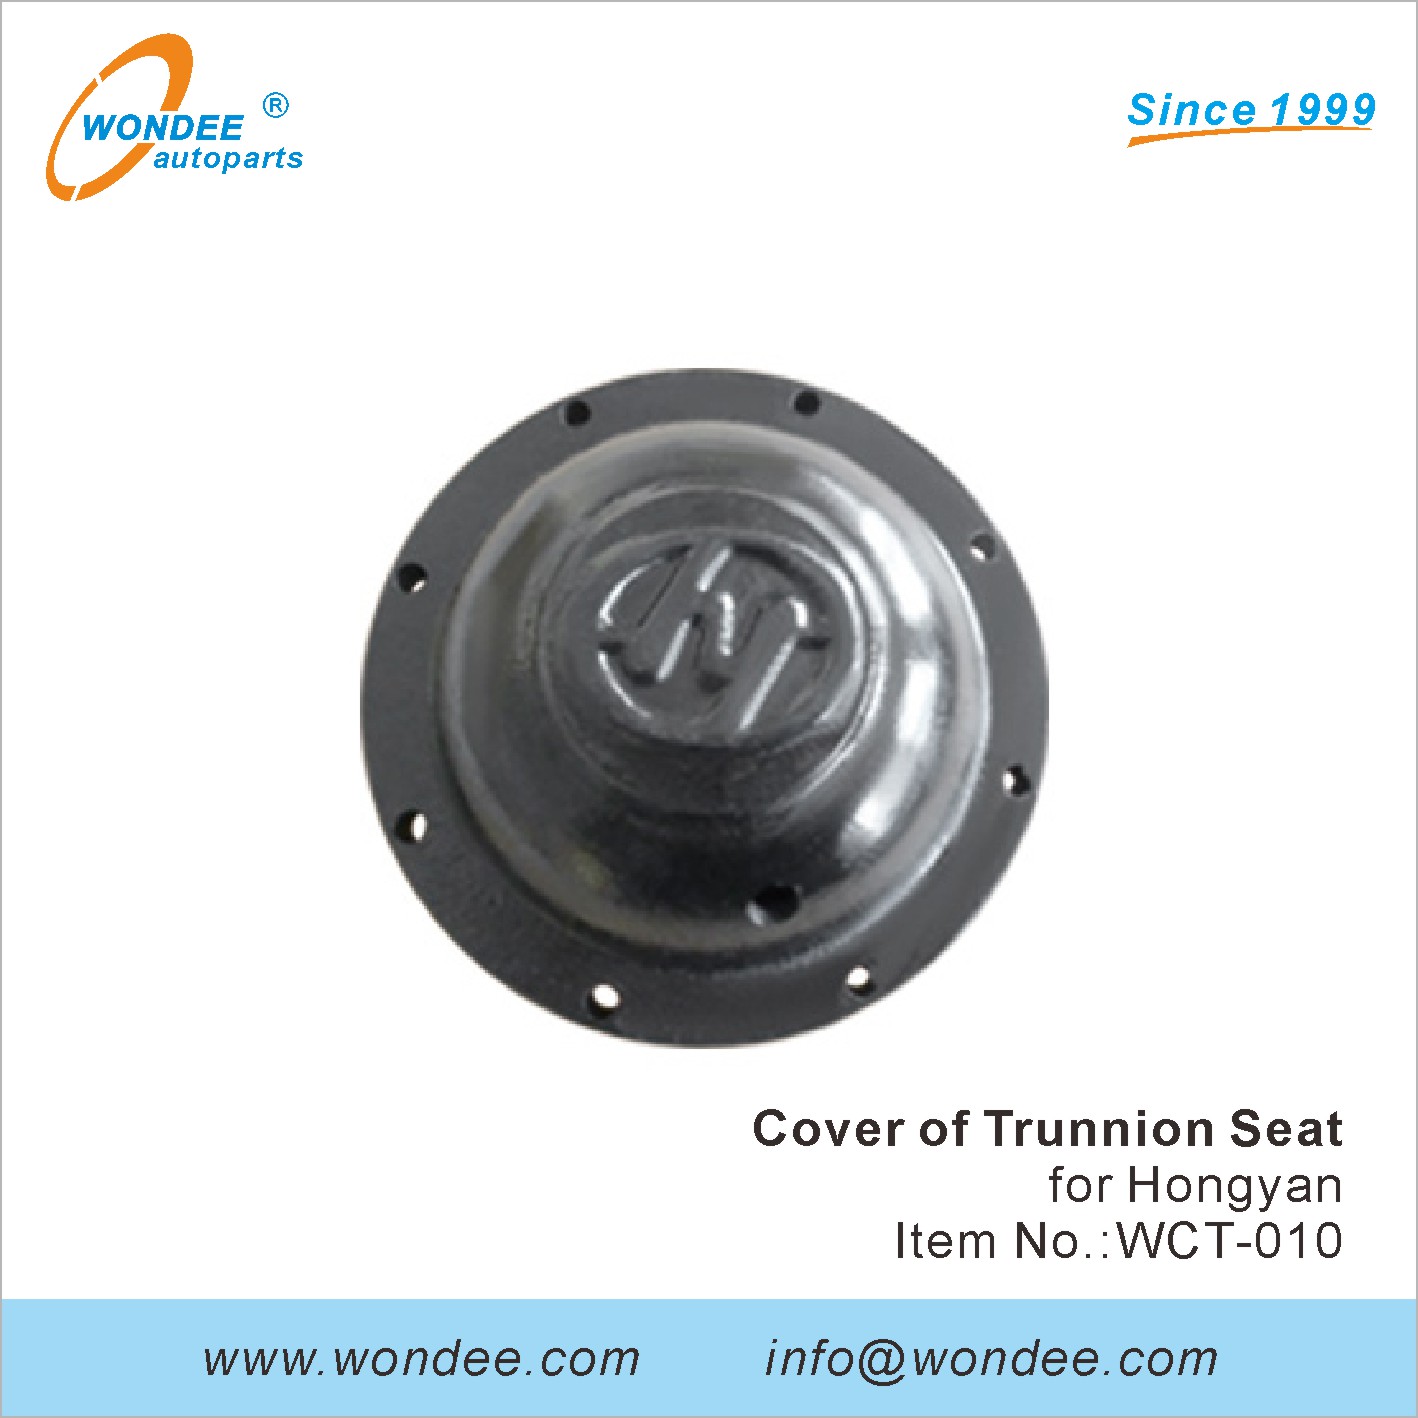 WONDEE cover of trunnion seat (10)